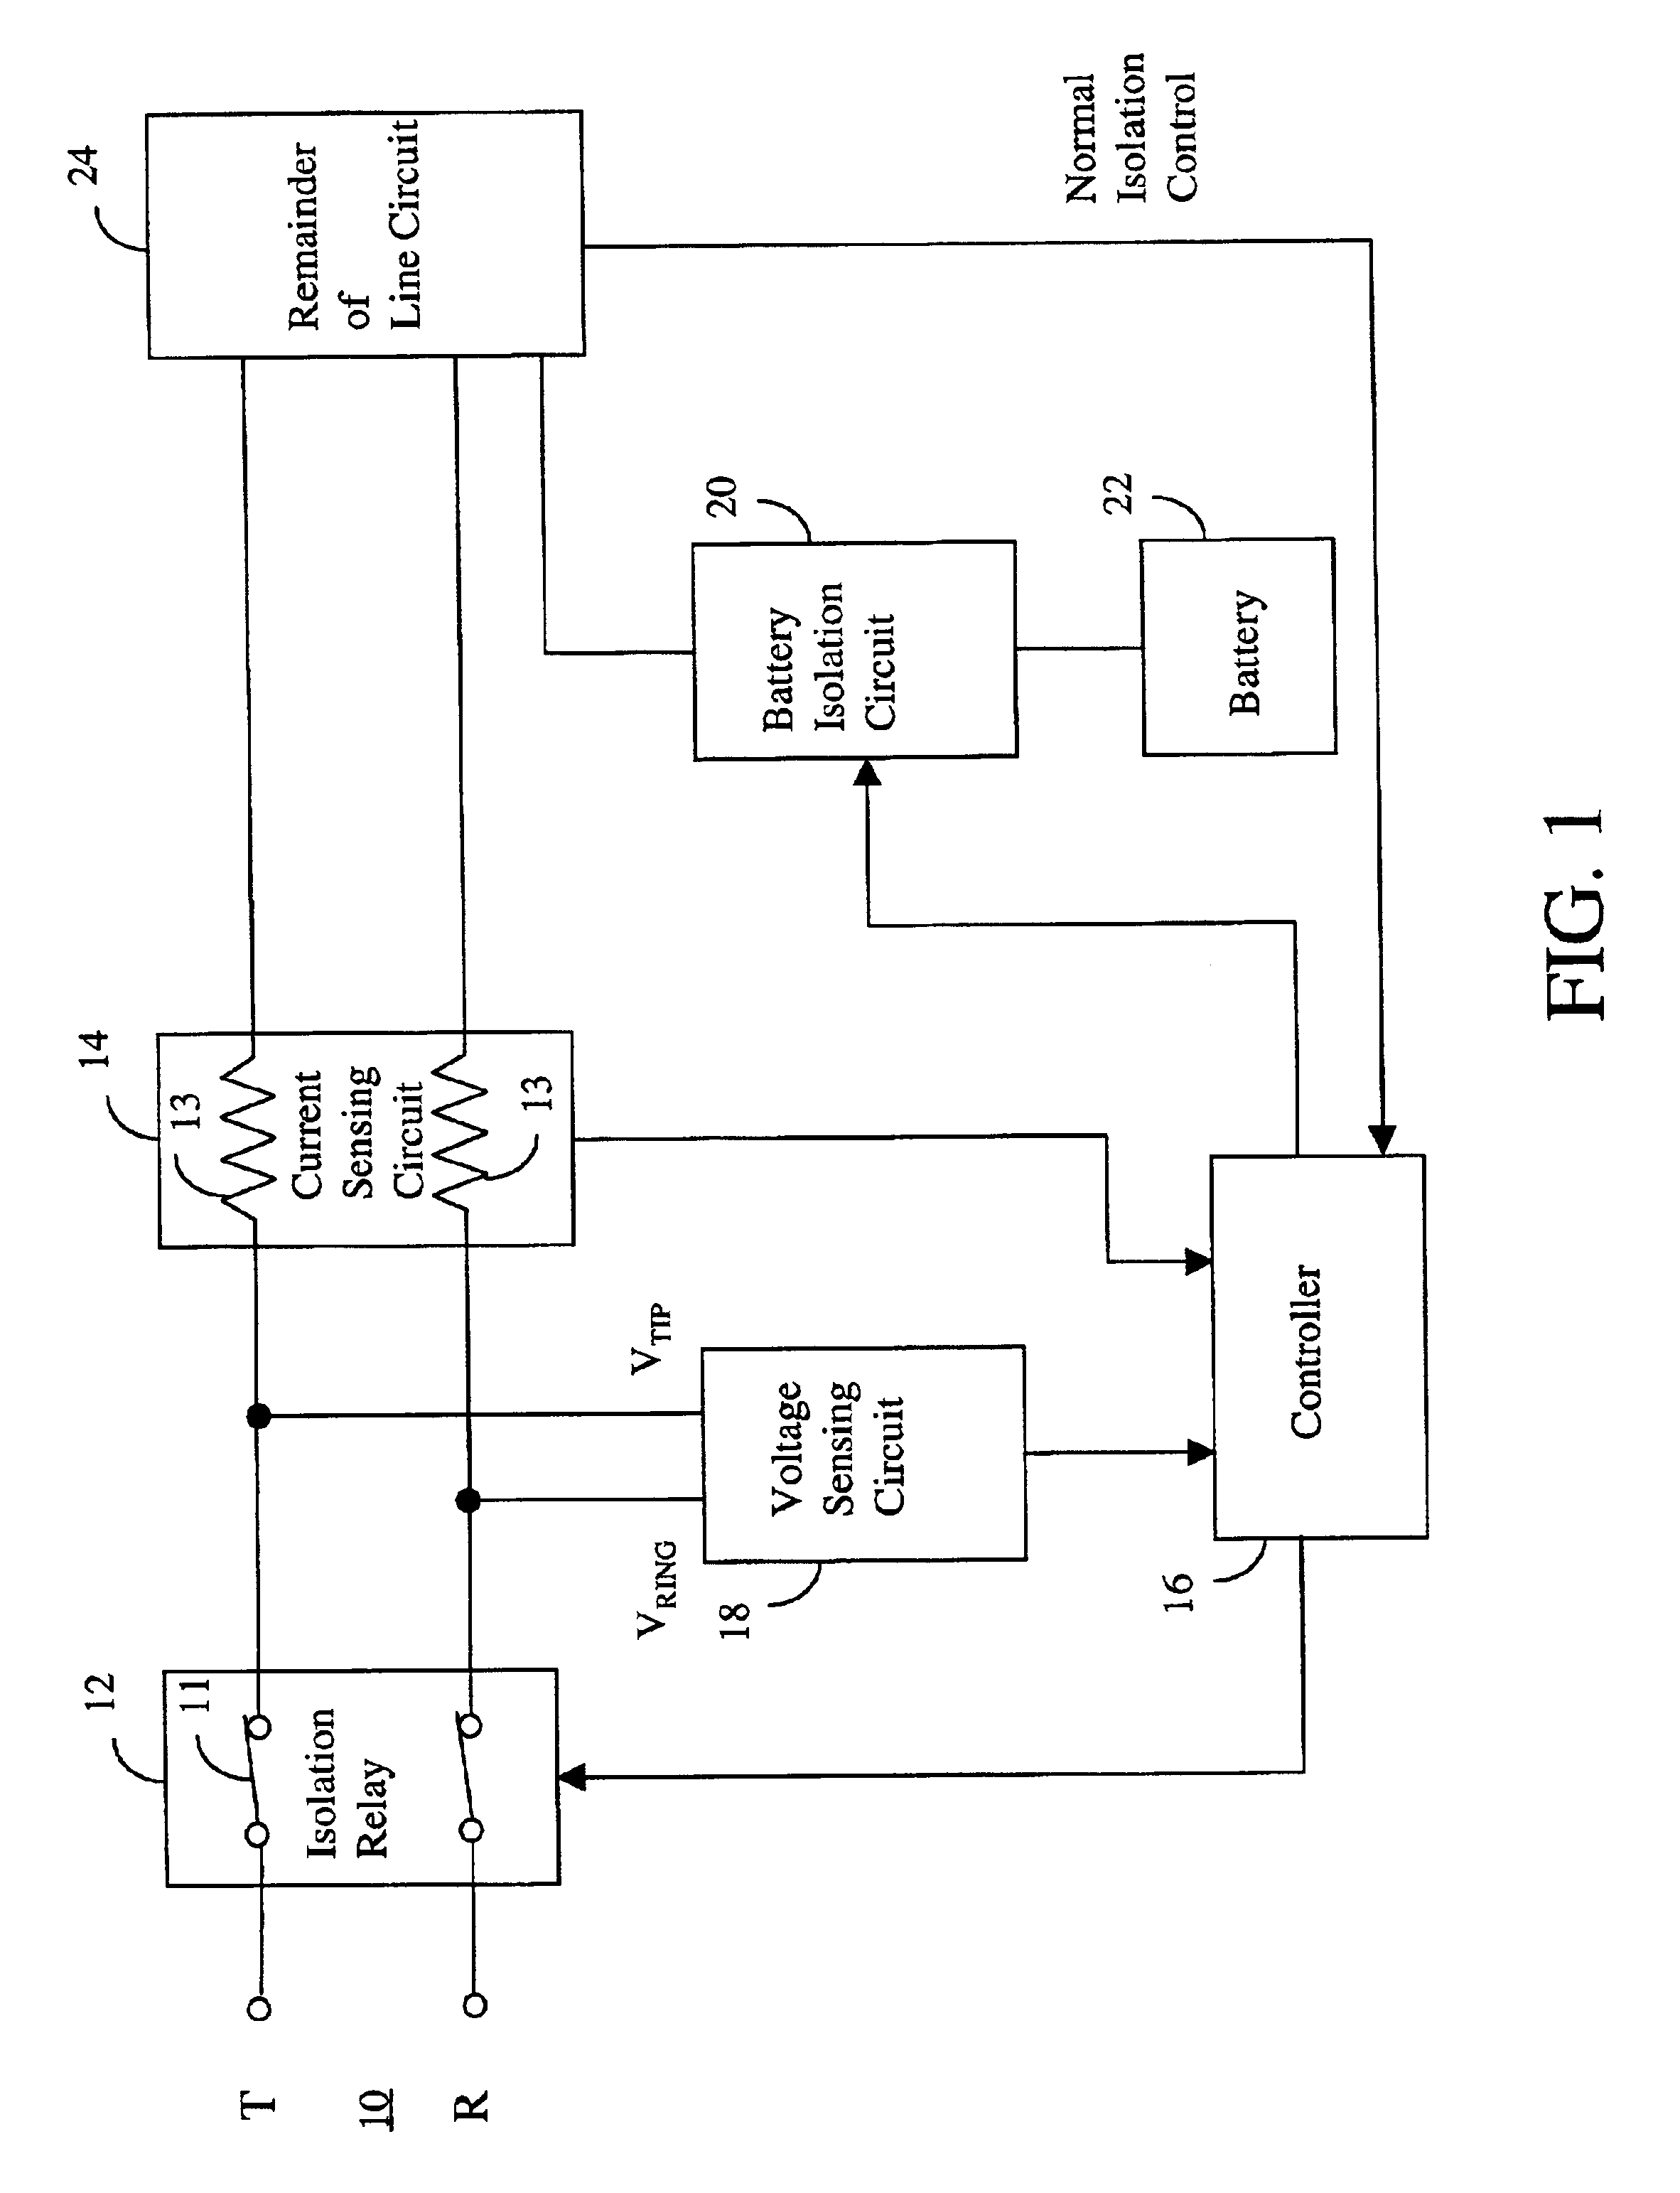 Voltage and protection arrangement for a telephone subscriber line interface circuit